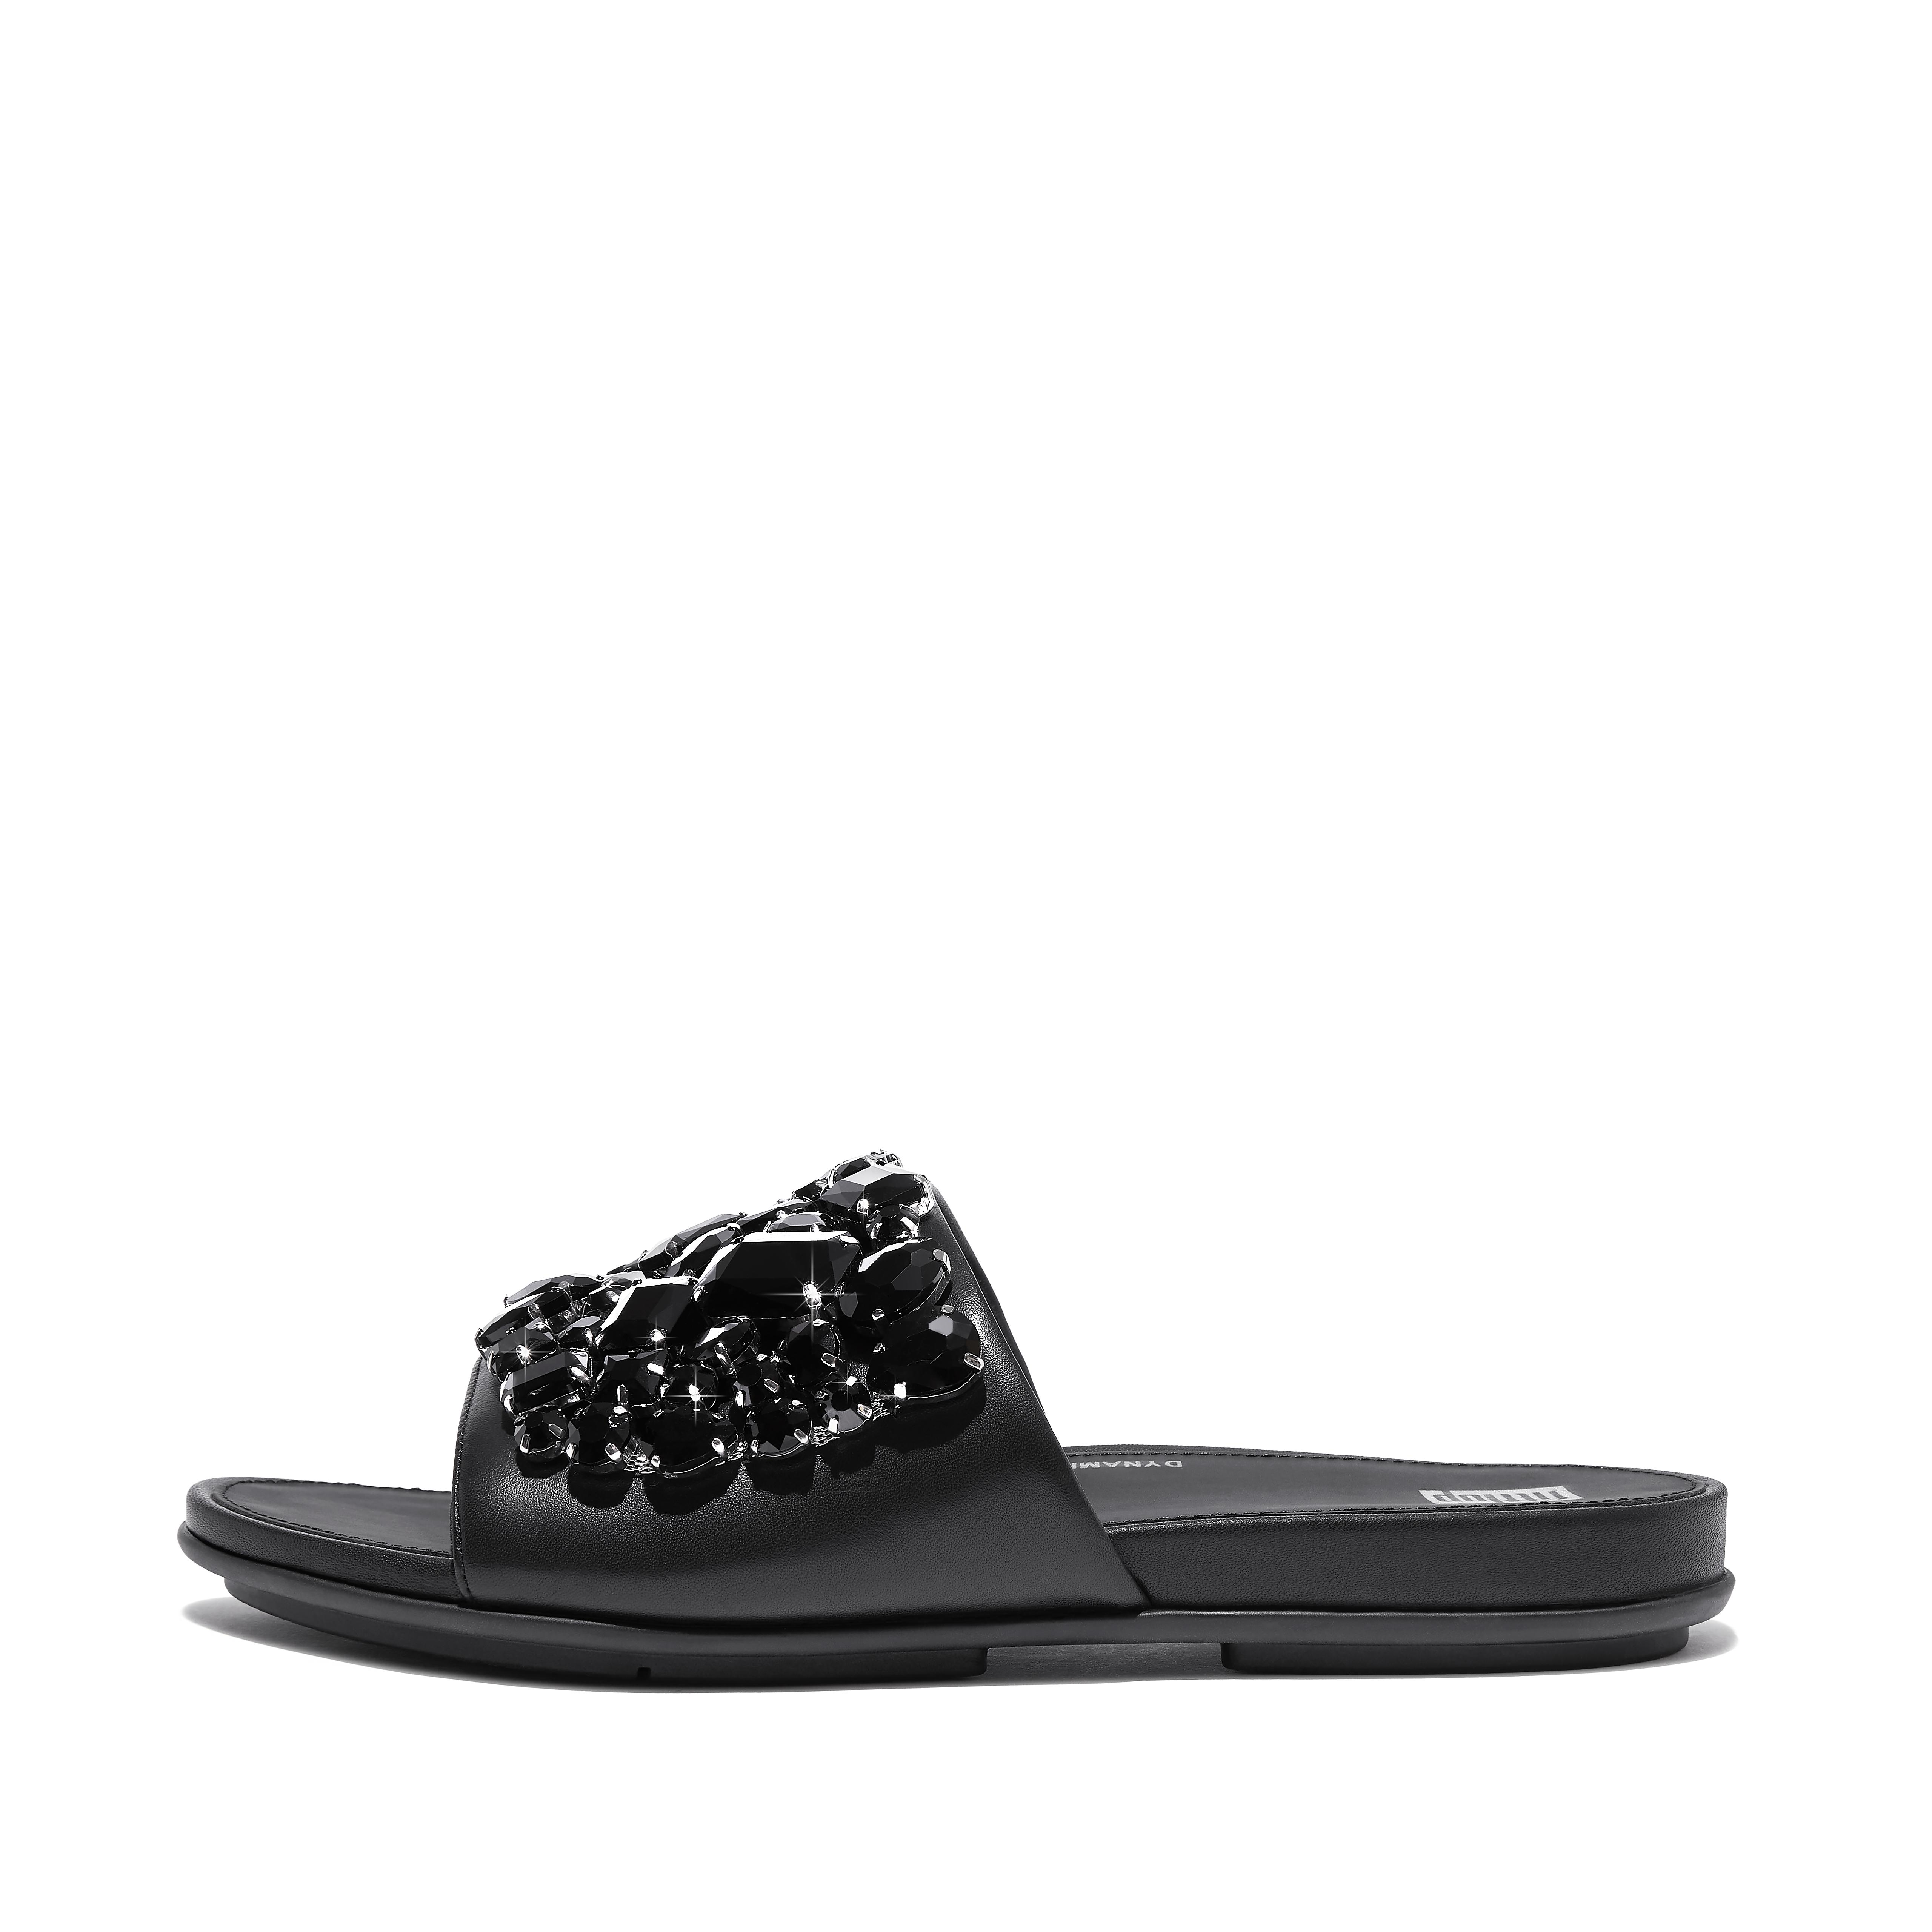 Fitflop Jewel-Deluxe Leather Slides,Black